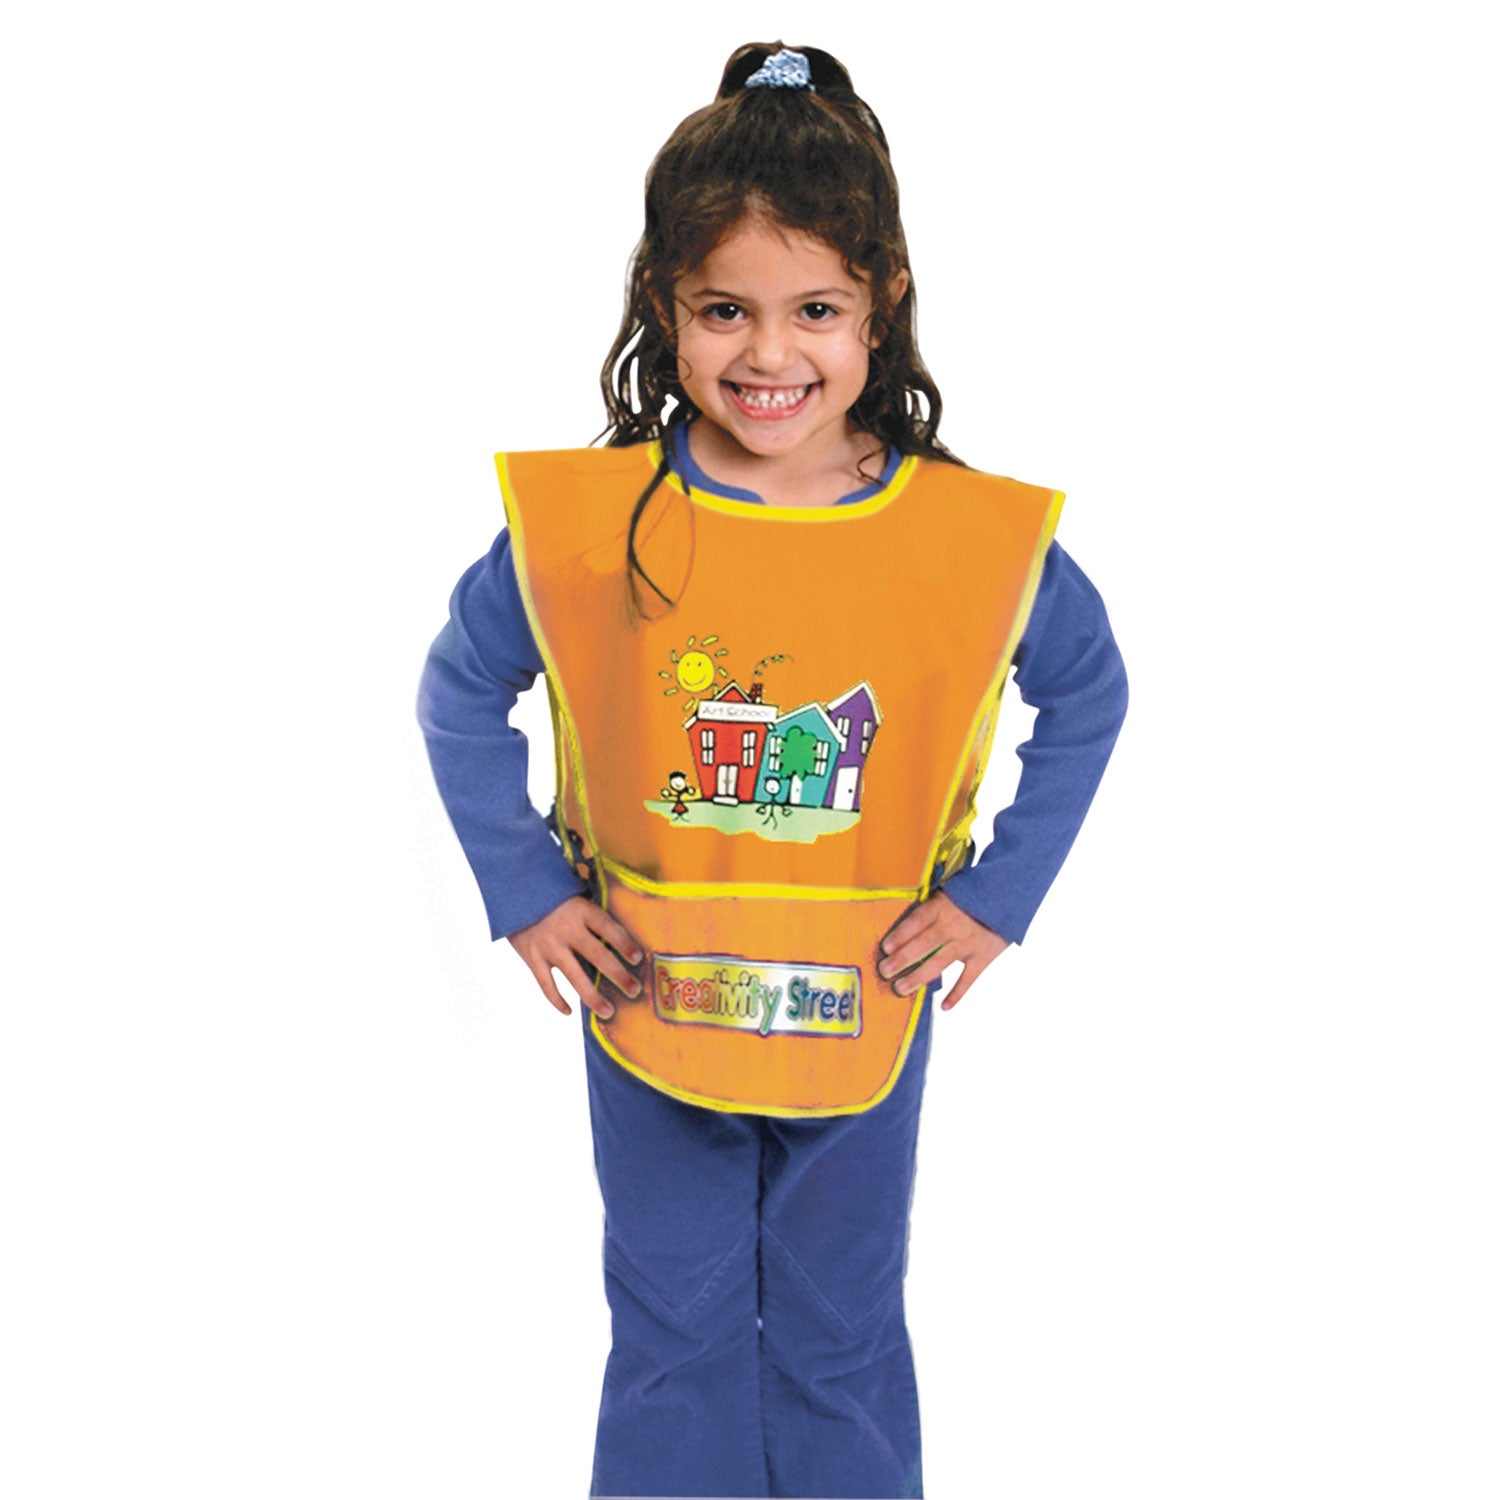 Kraft Artist Smock, Fits Kids Ages 3-8, Vinyl, One Size Fits All, Bright Colors - 